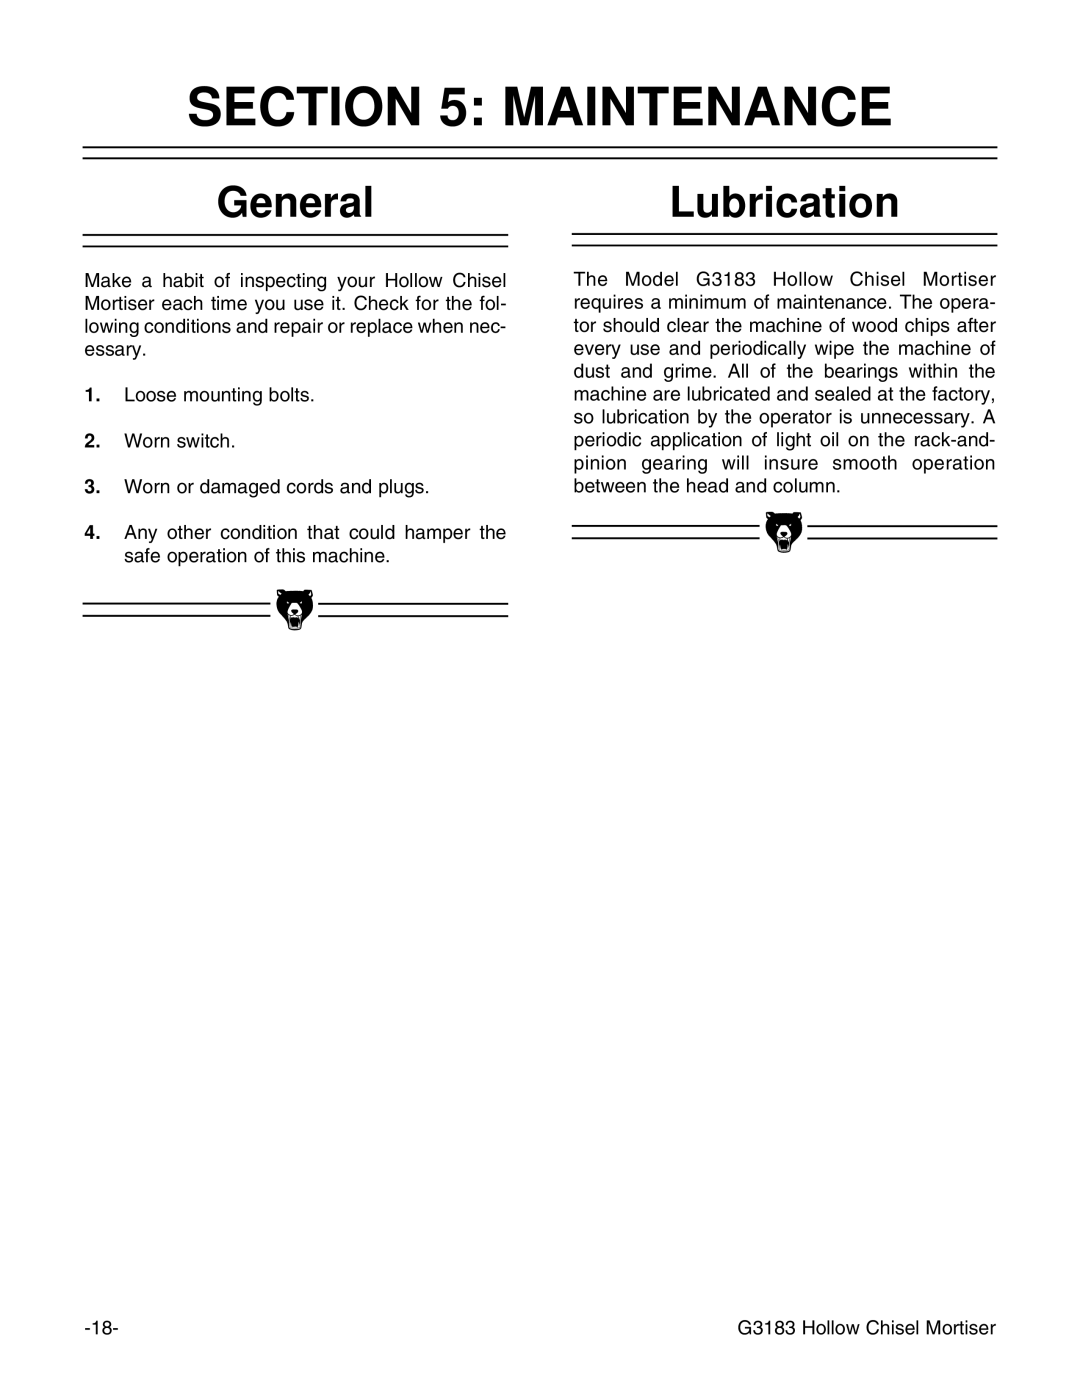 Grizzly G3183 instruction manual Maintenance, GeneralLubrication 